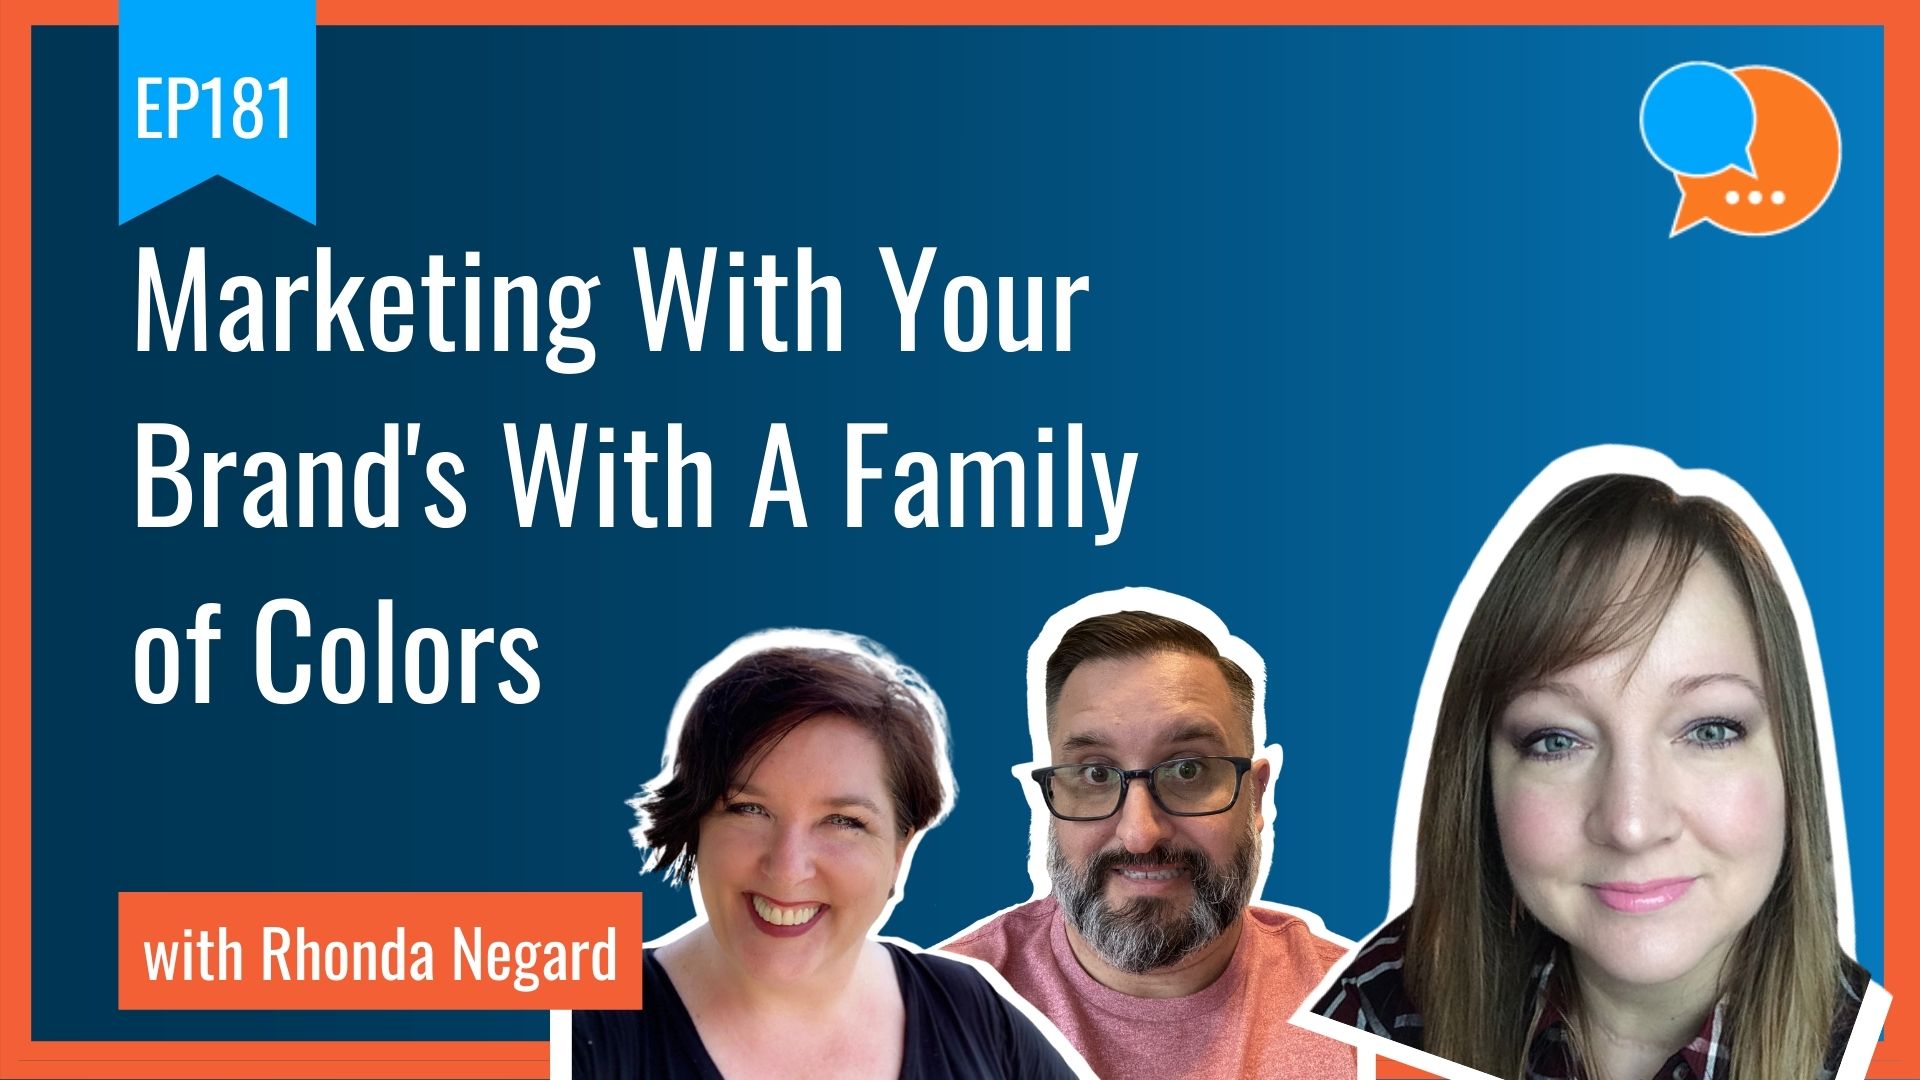 EP181 Marketing With Your Brands With A Family of Colors Smart Marketing Show yt 1